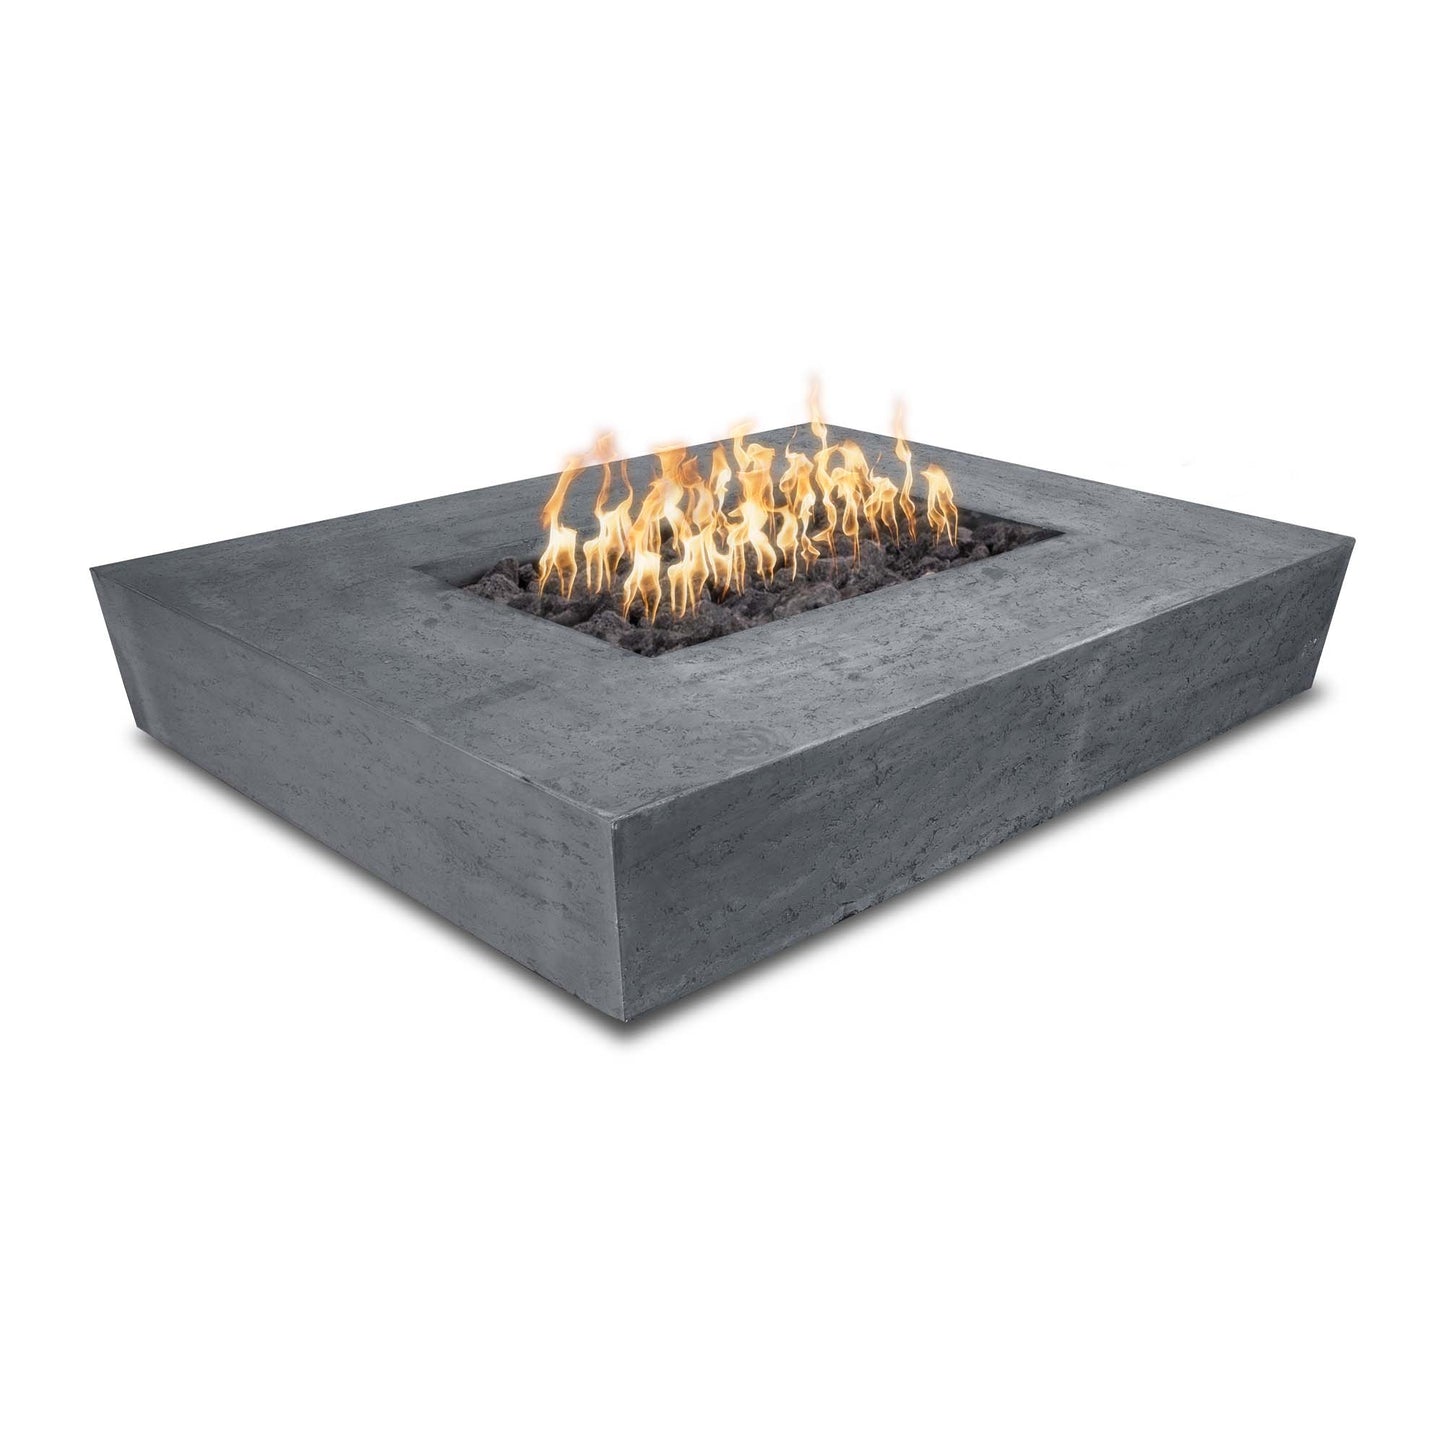 The Outdoor Plus Rectangular Heiko 58" White GFRC Concrete Liquid Propane Fire Pit with 12V Electronic Ignition